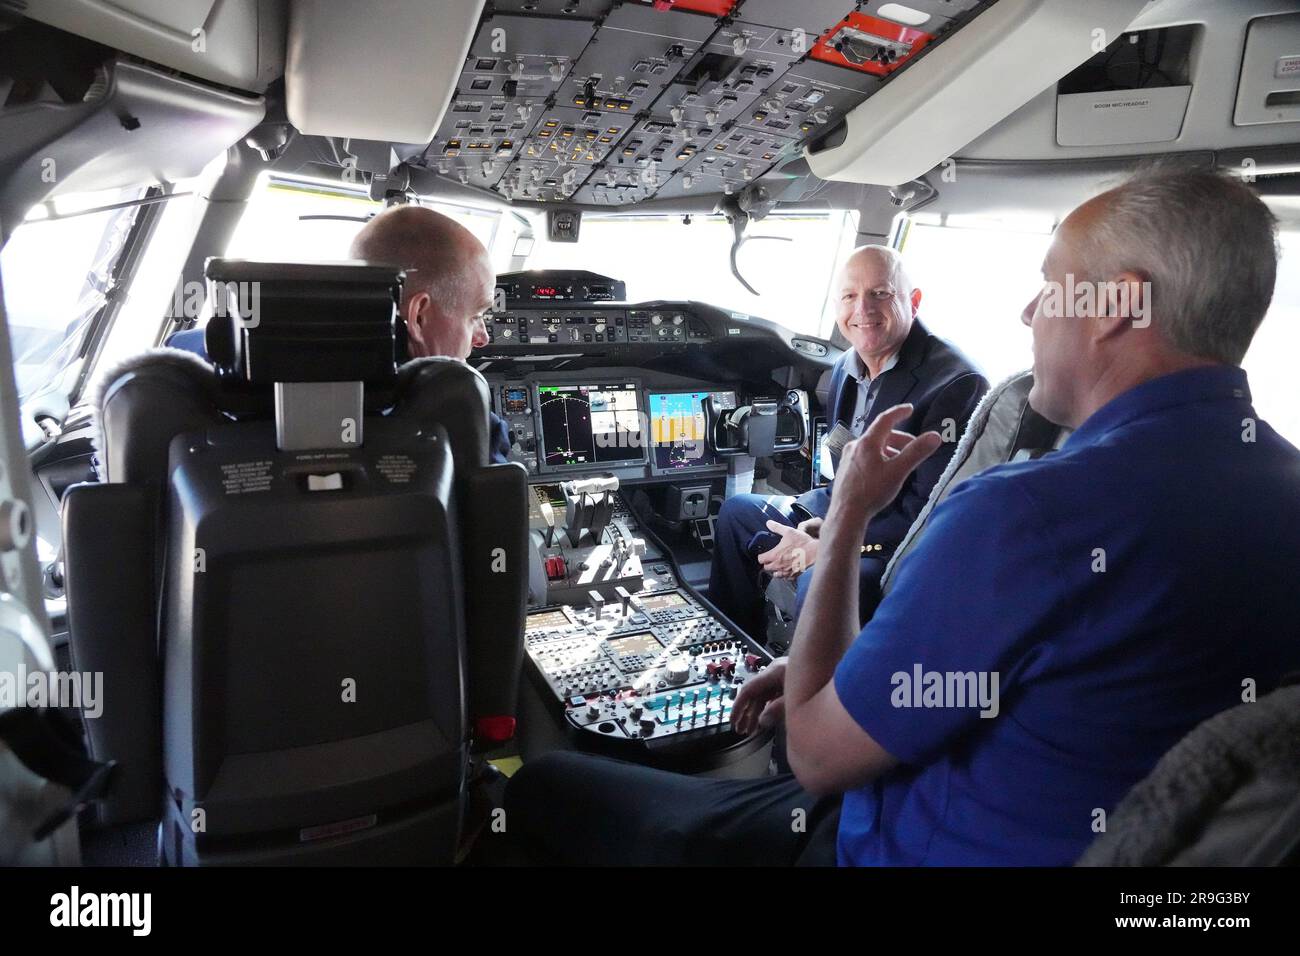 Pilot Ted Grady (R) talks with visitors in the flight deck of his Boeing 777-9, commercial jet that is in St. Louis for a layover at St. Louis-Lambert International Airport in St. Louis on Monday, June 26, 2023. The 777-9 is the only Boeing commercial airplane with St. Louis- made parts on the aircraft. Boeing employees will spend the day touring the aircraft, seeing it for the first time since production began. Boeing employees in St. Louis produce the 777-9's folding wing tip, moveable trailing edge and fixed leading edge on the wings, as well as the rudder and elevator on the empennage. Pho Stock Photo